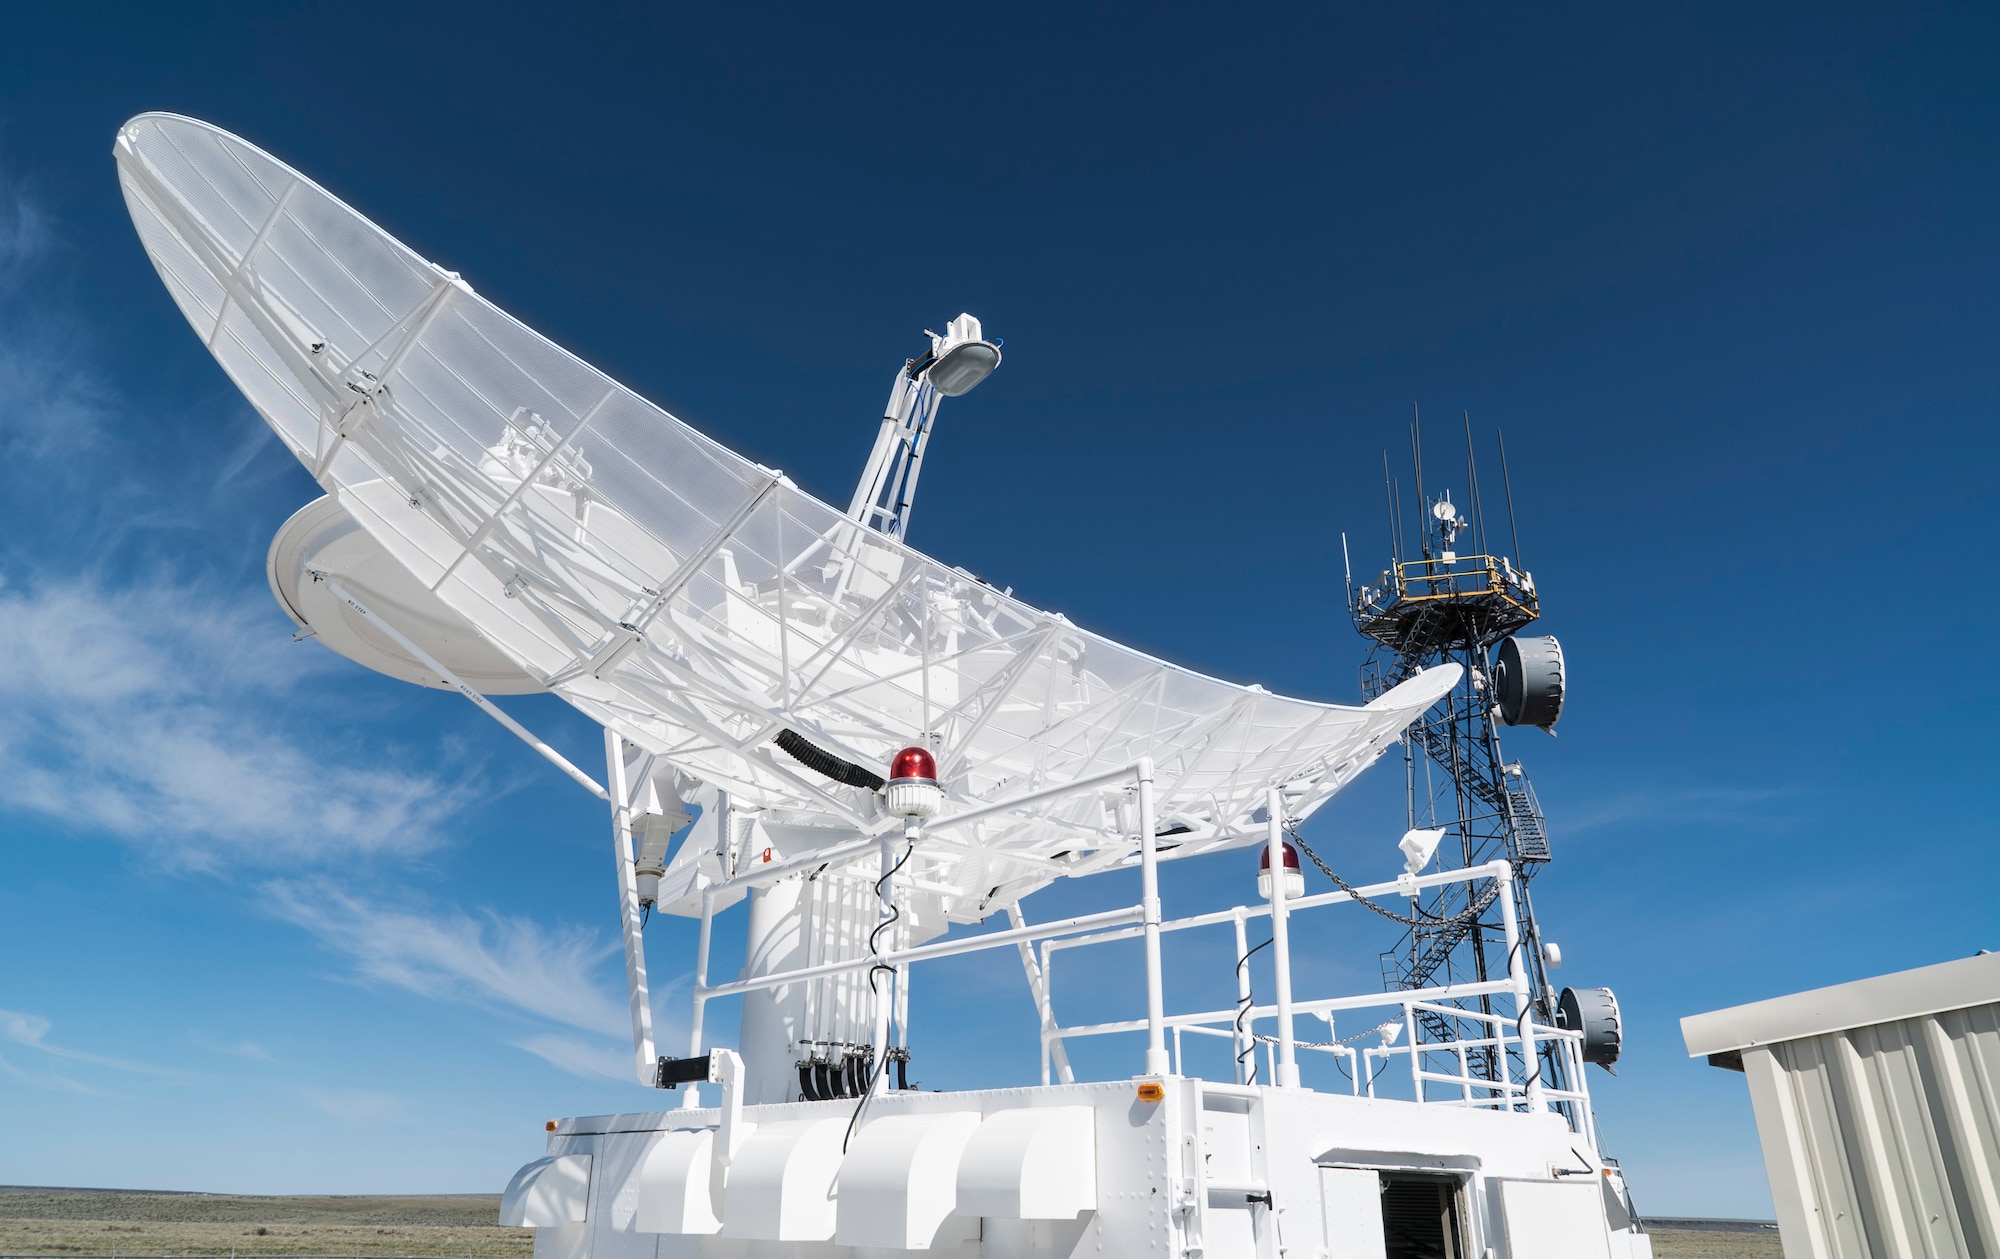 The dish for the 266th Range Squadron's Multiple Threat Emitter System shines in the morning sun at the Mountain Home Air Force Base Range Complex in Idaho May 9, 2017. The system can simulate 65 different types of ground threats to help train air crews through scenarios that mimic real enemy threats the crews might face. (U.S. Air Force photo/Staff Sgt. Samuel Morse)